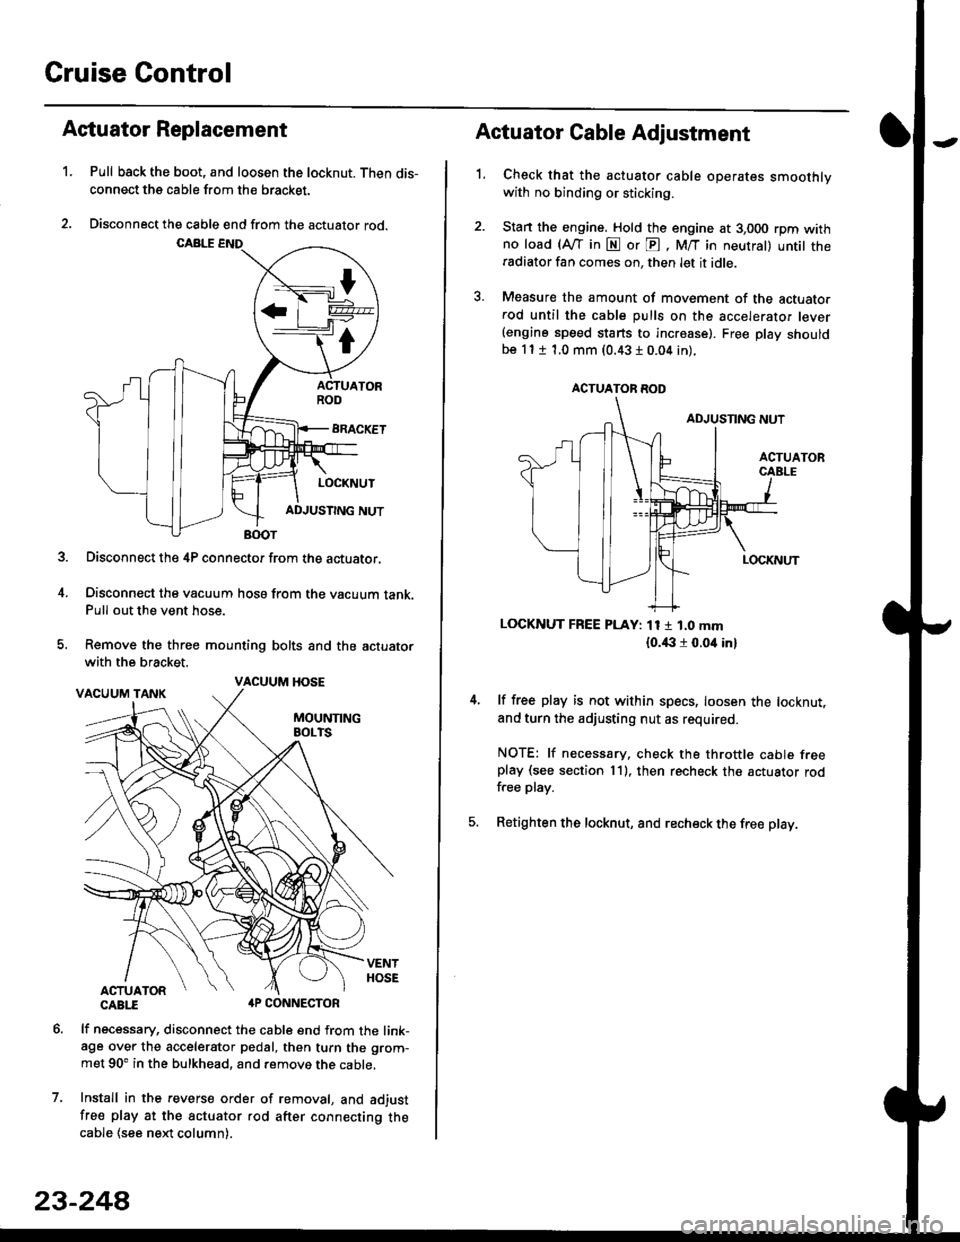 HONDA CIVIC 2000 6.G Repair Manual Cruise Control
t
D=
t
Astuator Replacement
1.Pull back the boot, and loosen the locknut. Then dis-
connect the cable from the bracket.
Disconnect the cable end from the actuator rod.
Disconnect the 4P